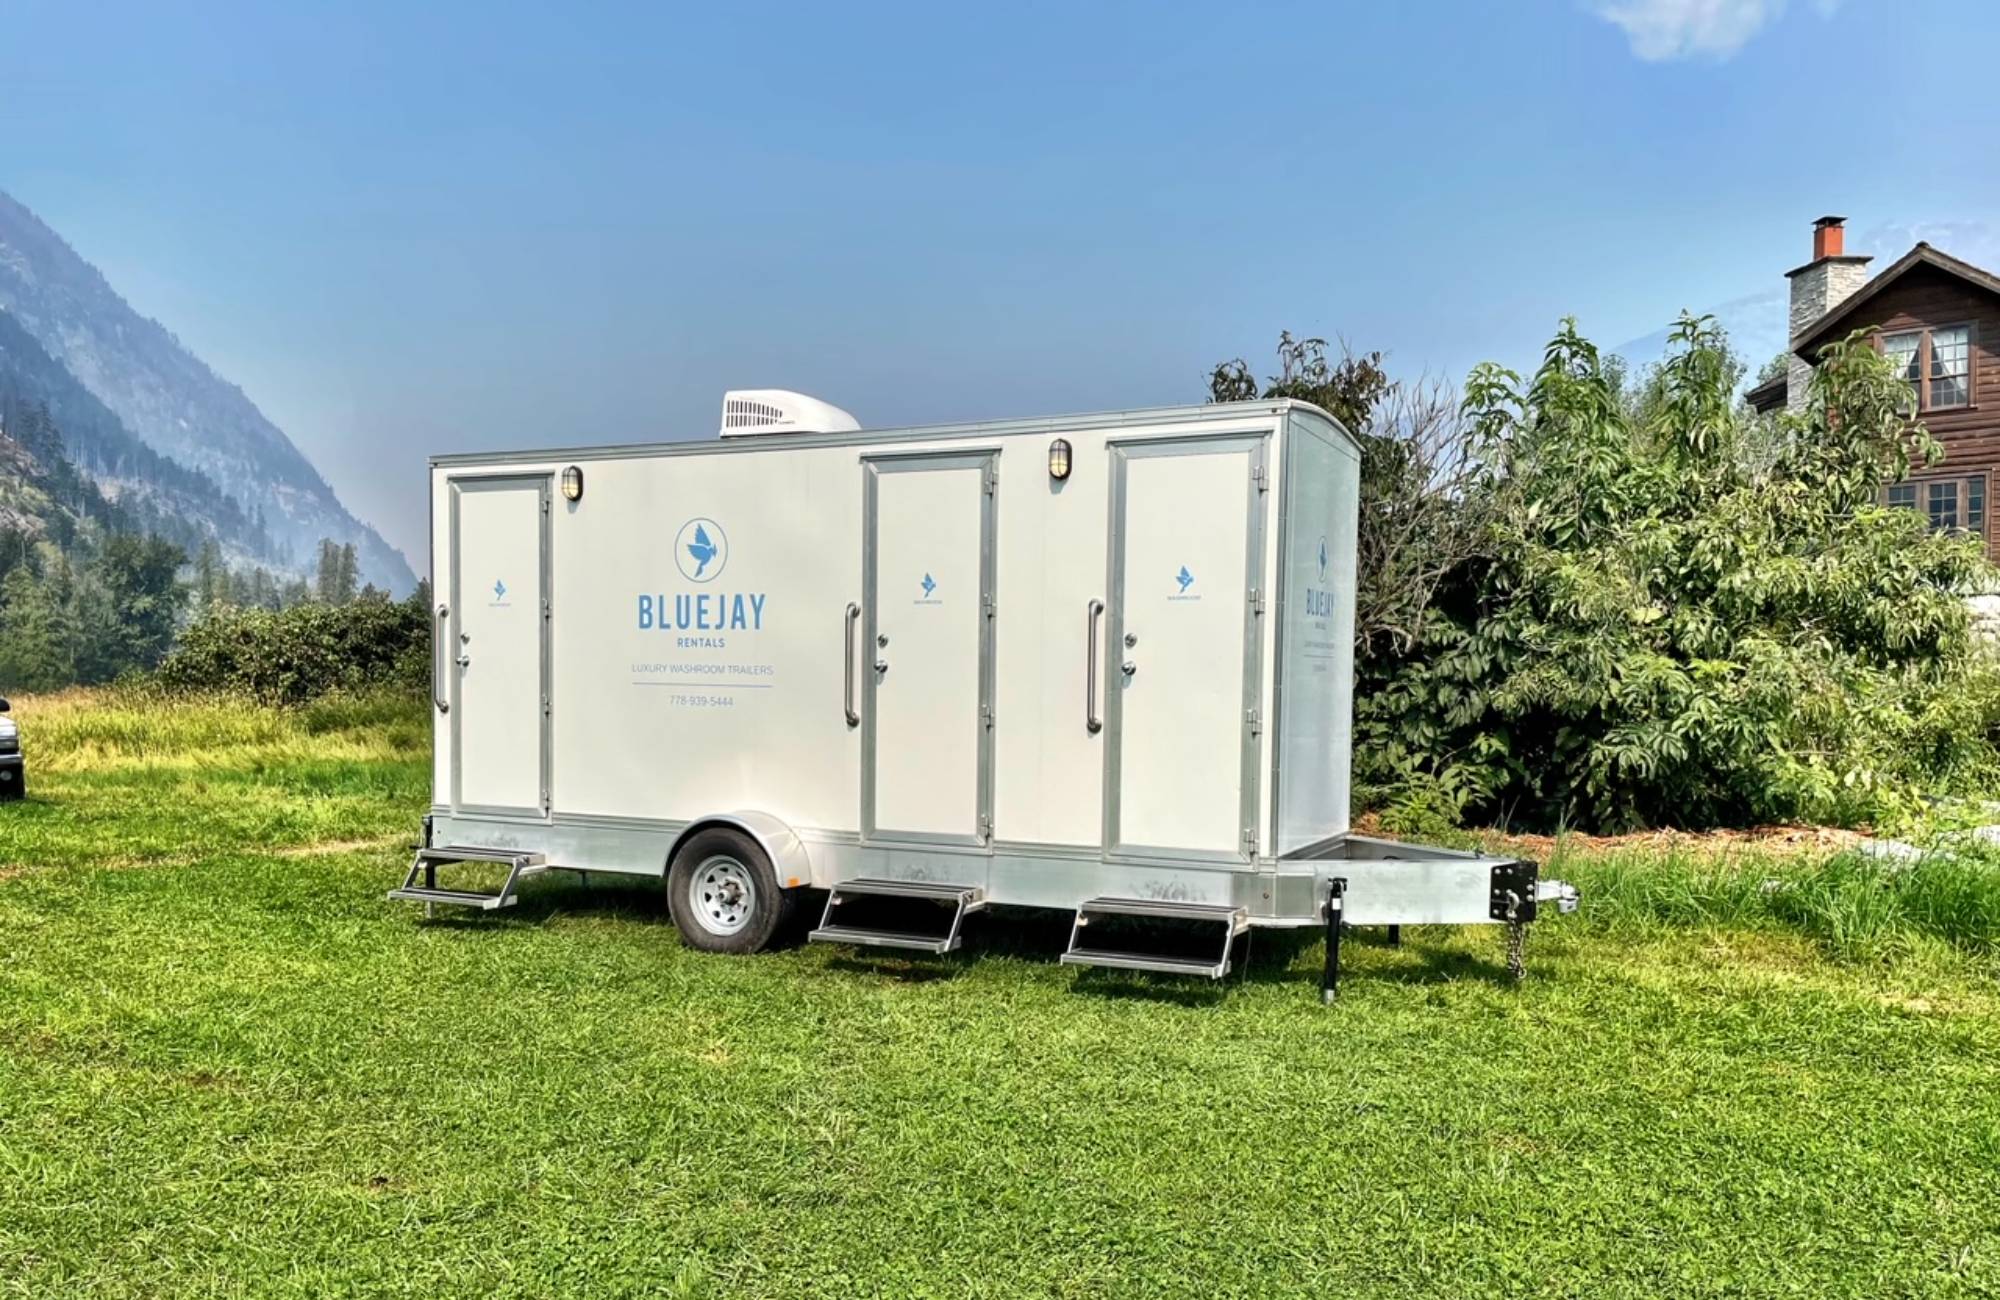 From Weddings to Concerts: The Versatility of Luxury Washroom Trailer Rentals